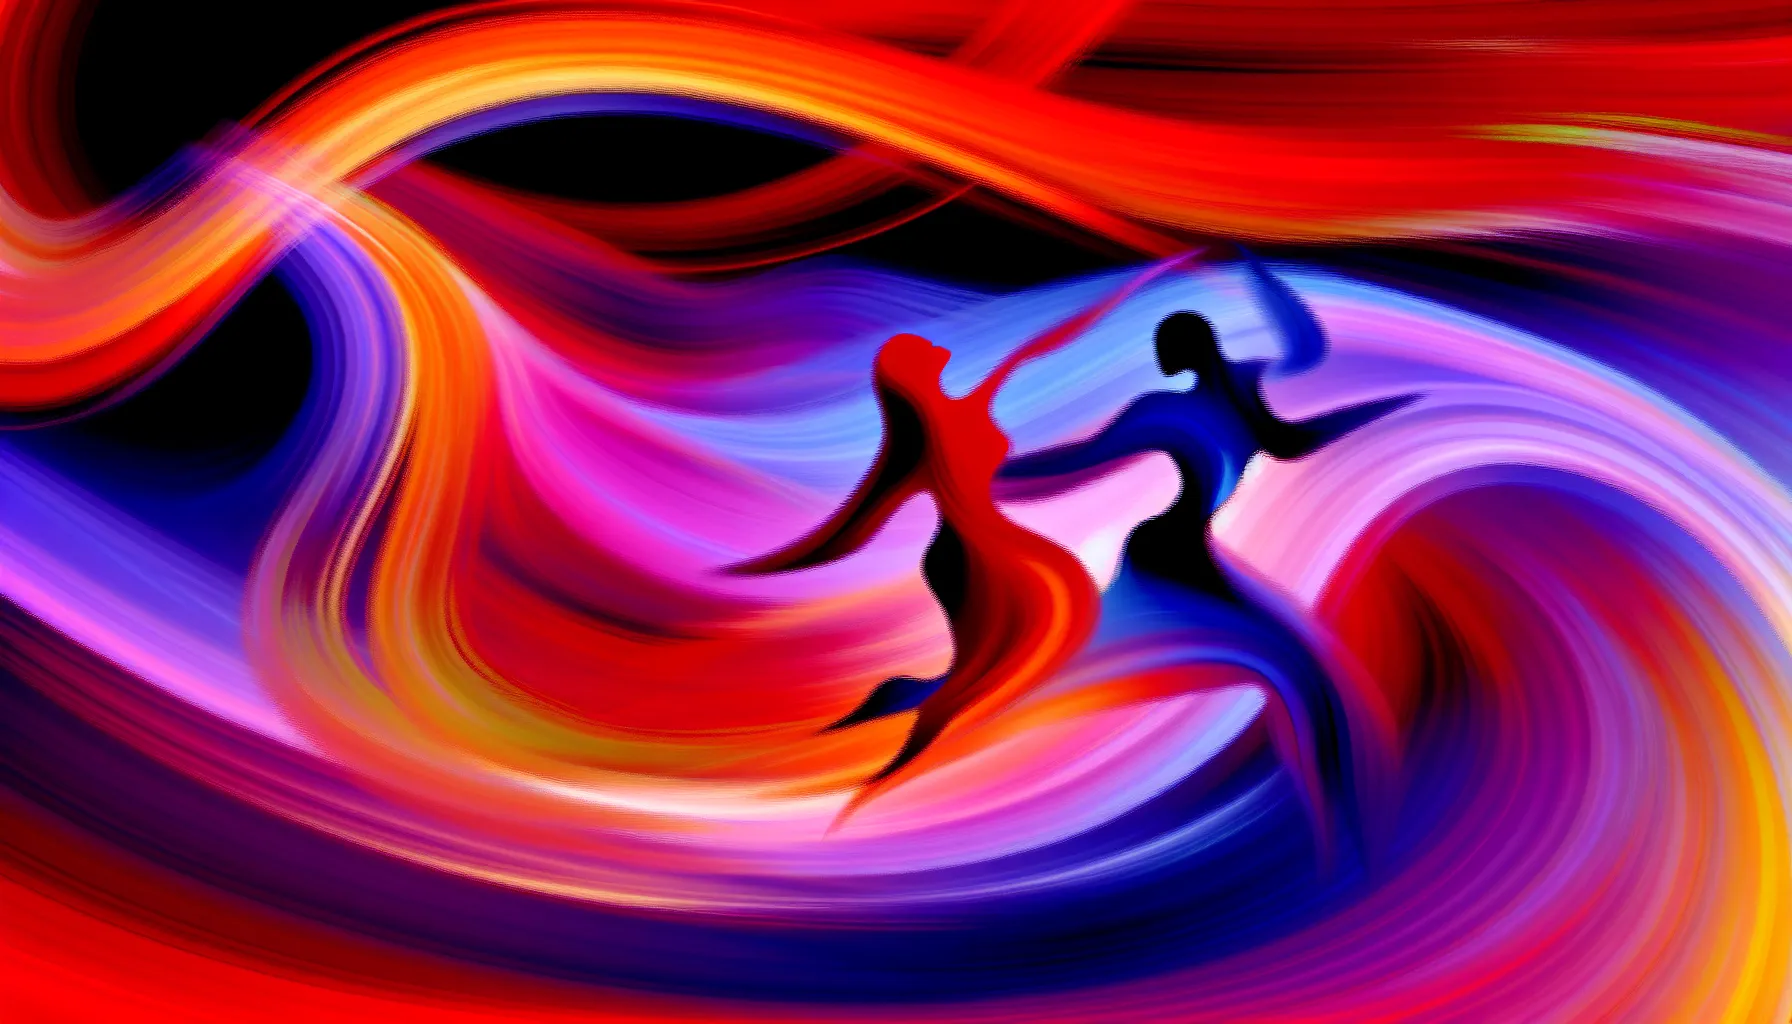 <strong>Embrace the Chase:</strong> In the whirlwind of hues and forms, our silhouettes dance, embodying the dynamic push and pull of romance—where the joy lies not just in the capture, but in the exhilarating journey of pursuit.